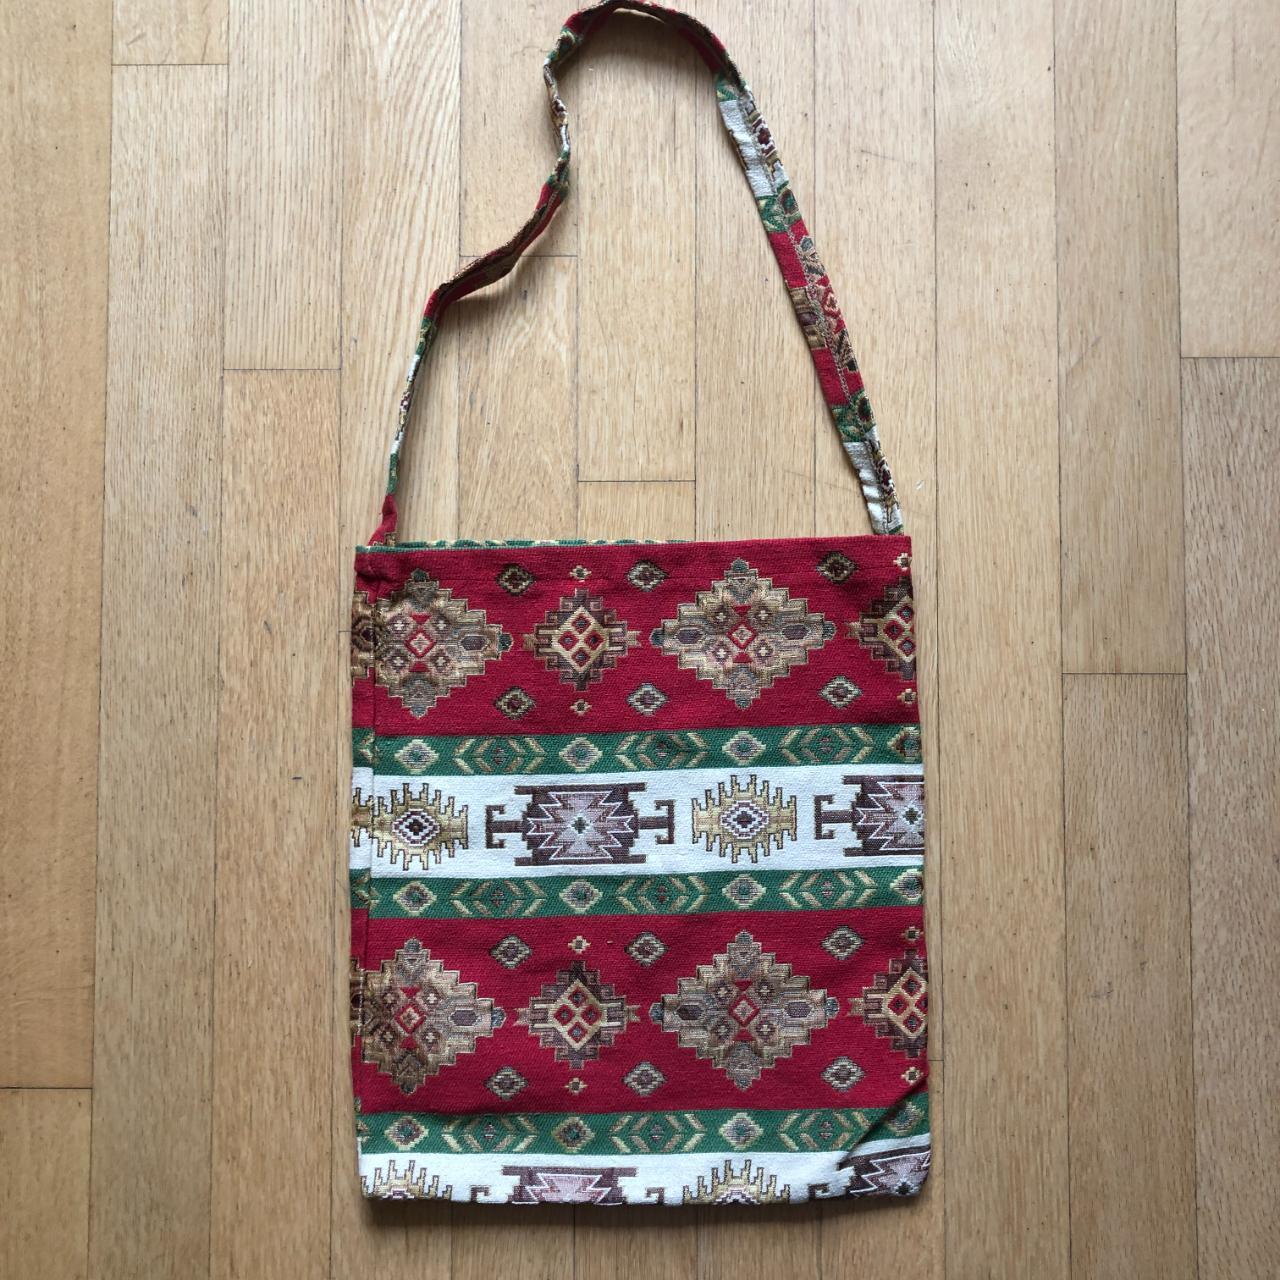 American Vintage Tapestry Tote Bags for Women